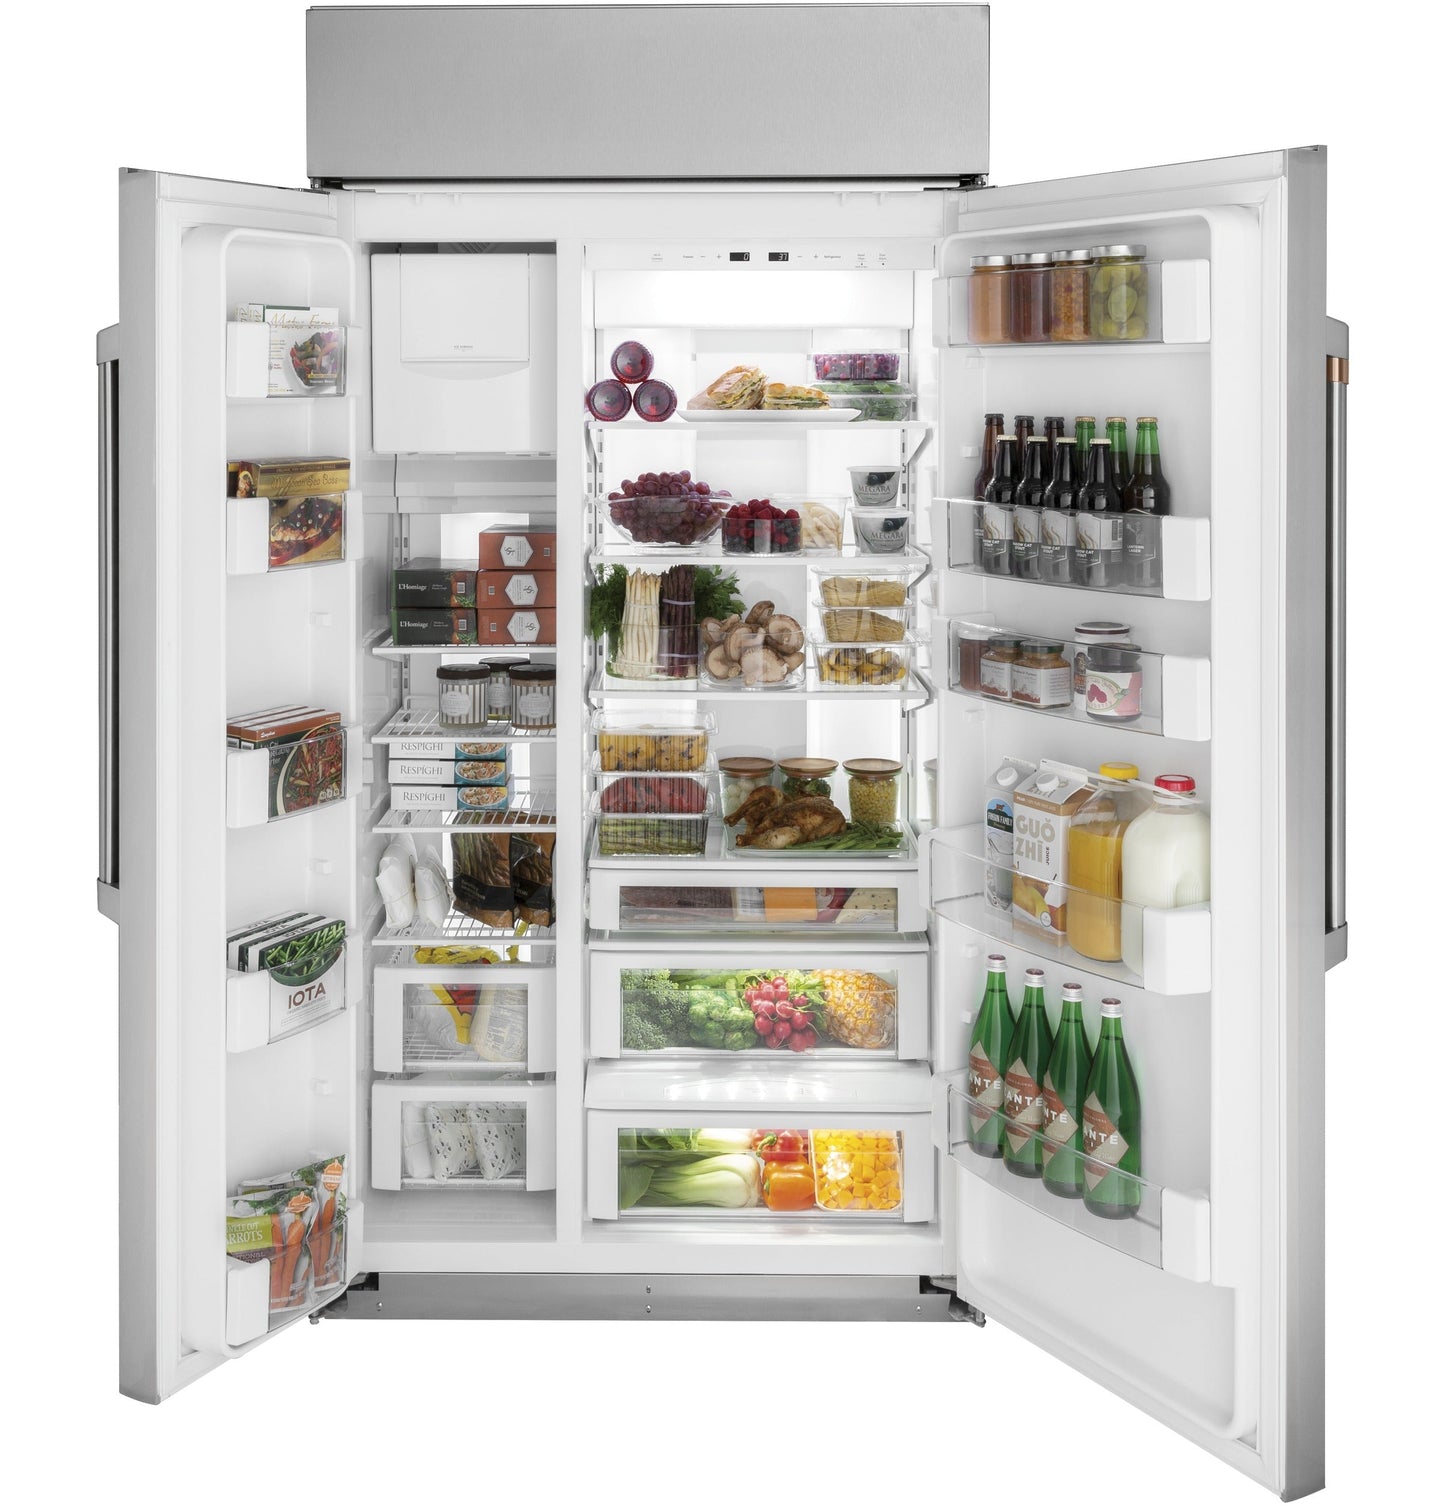 Café 48" Built-In Side-by-Side Refrigerator Stainless Steel - CSB48WP2NS1